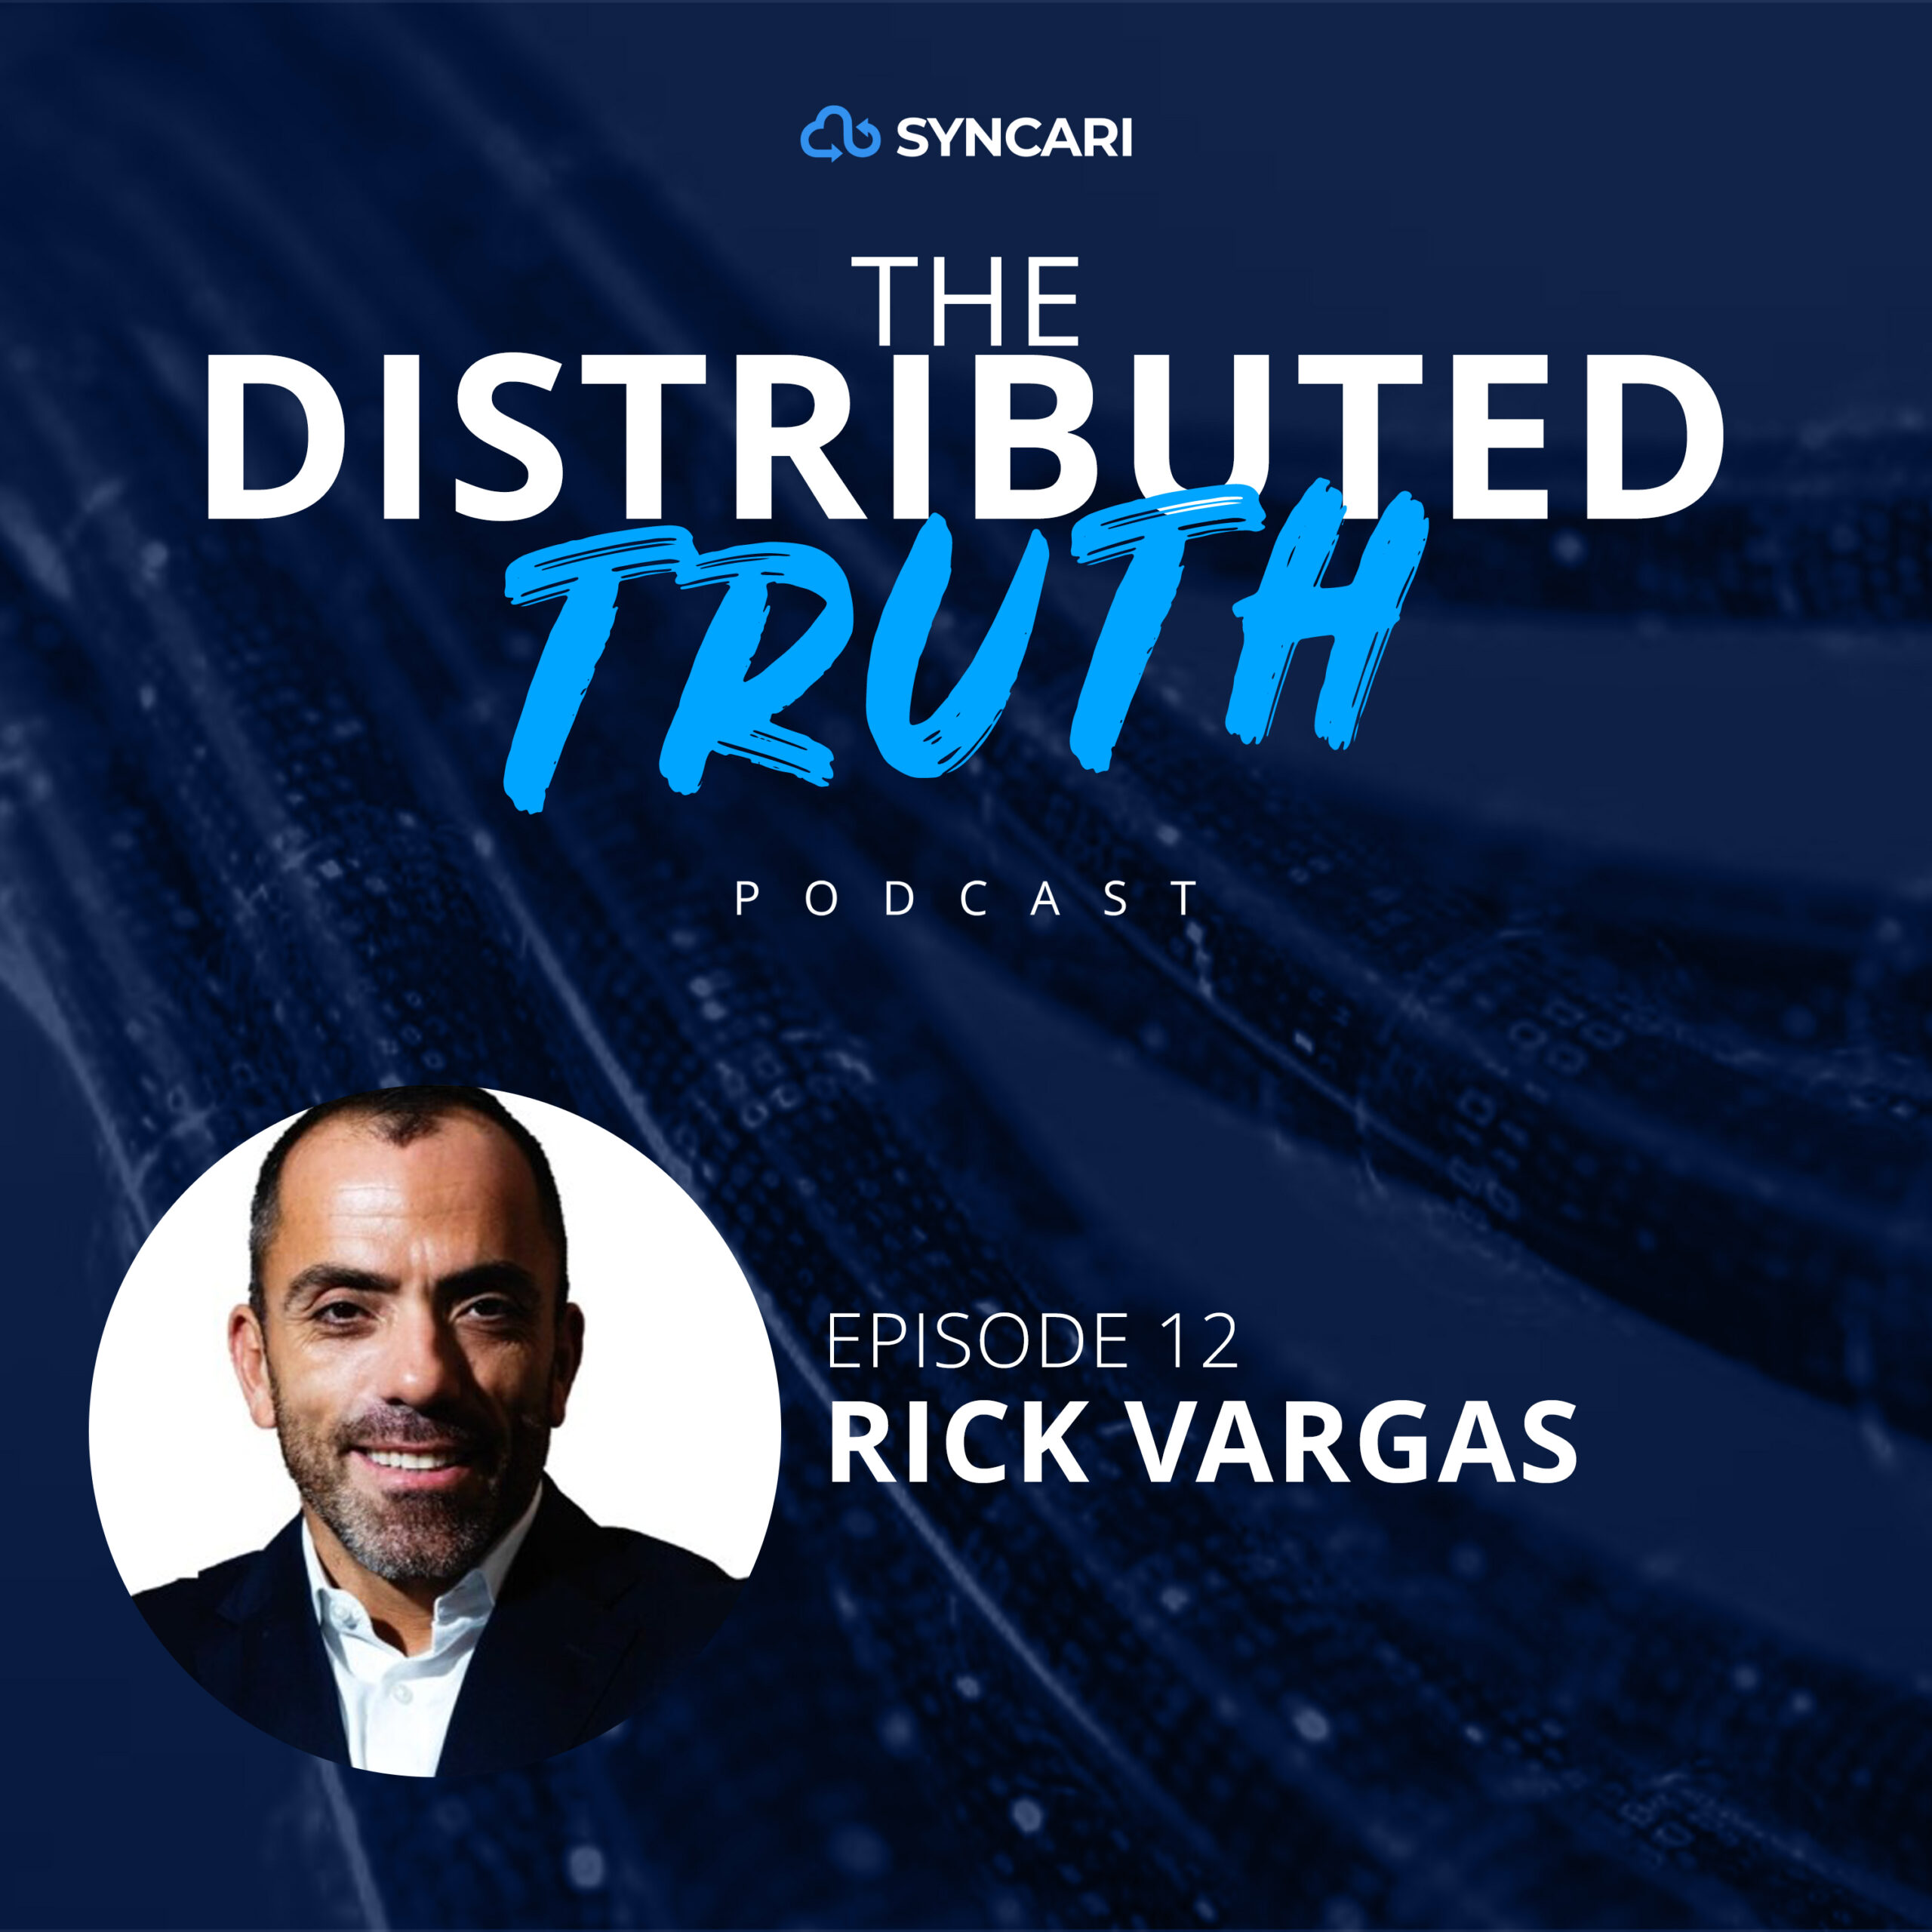 The Missing Link in Intelligent Automation: Unified Data, with Rick Vargas